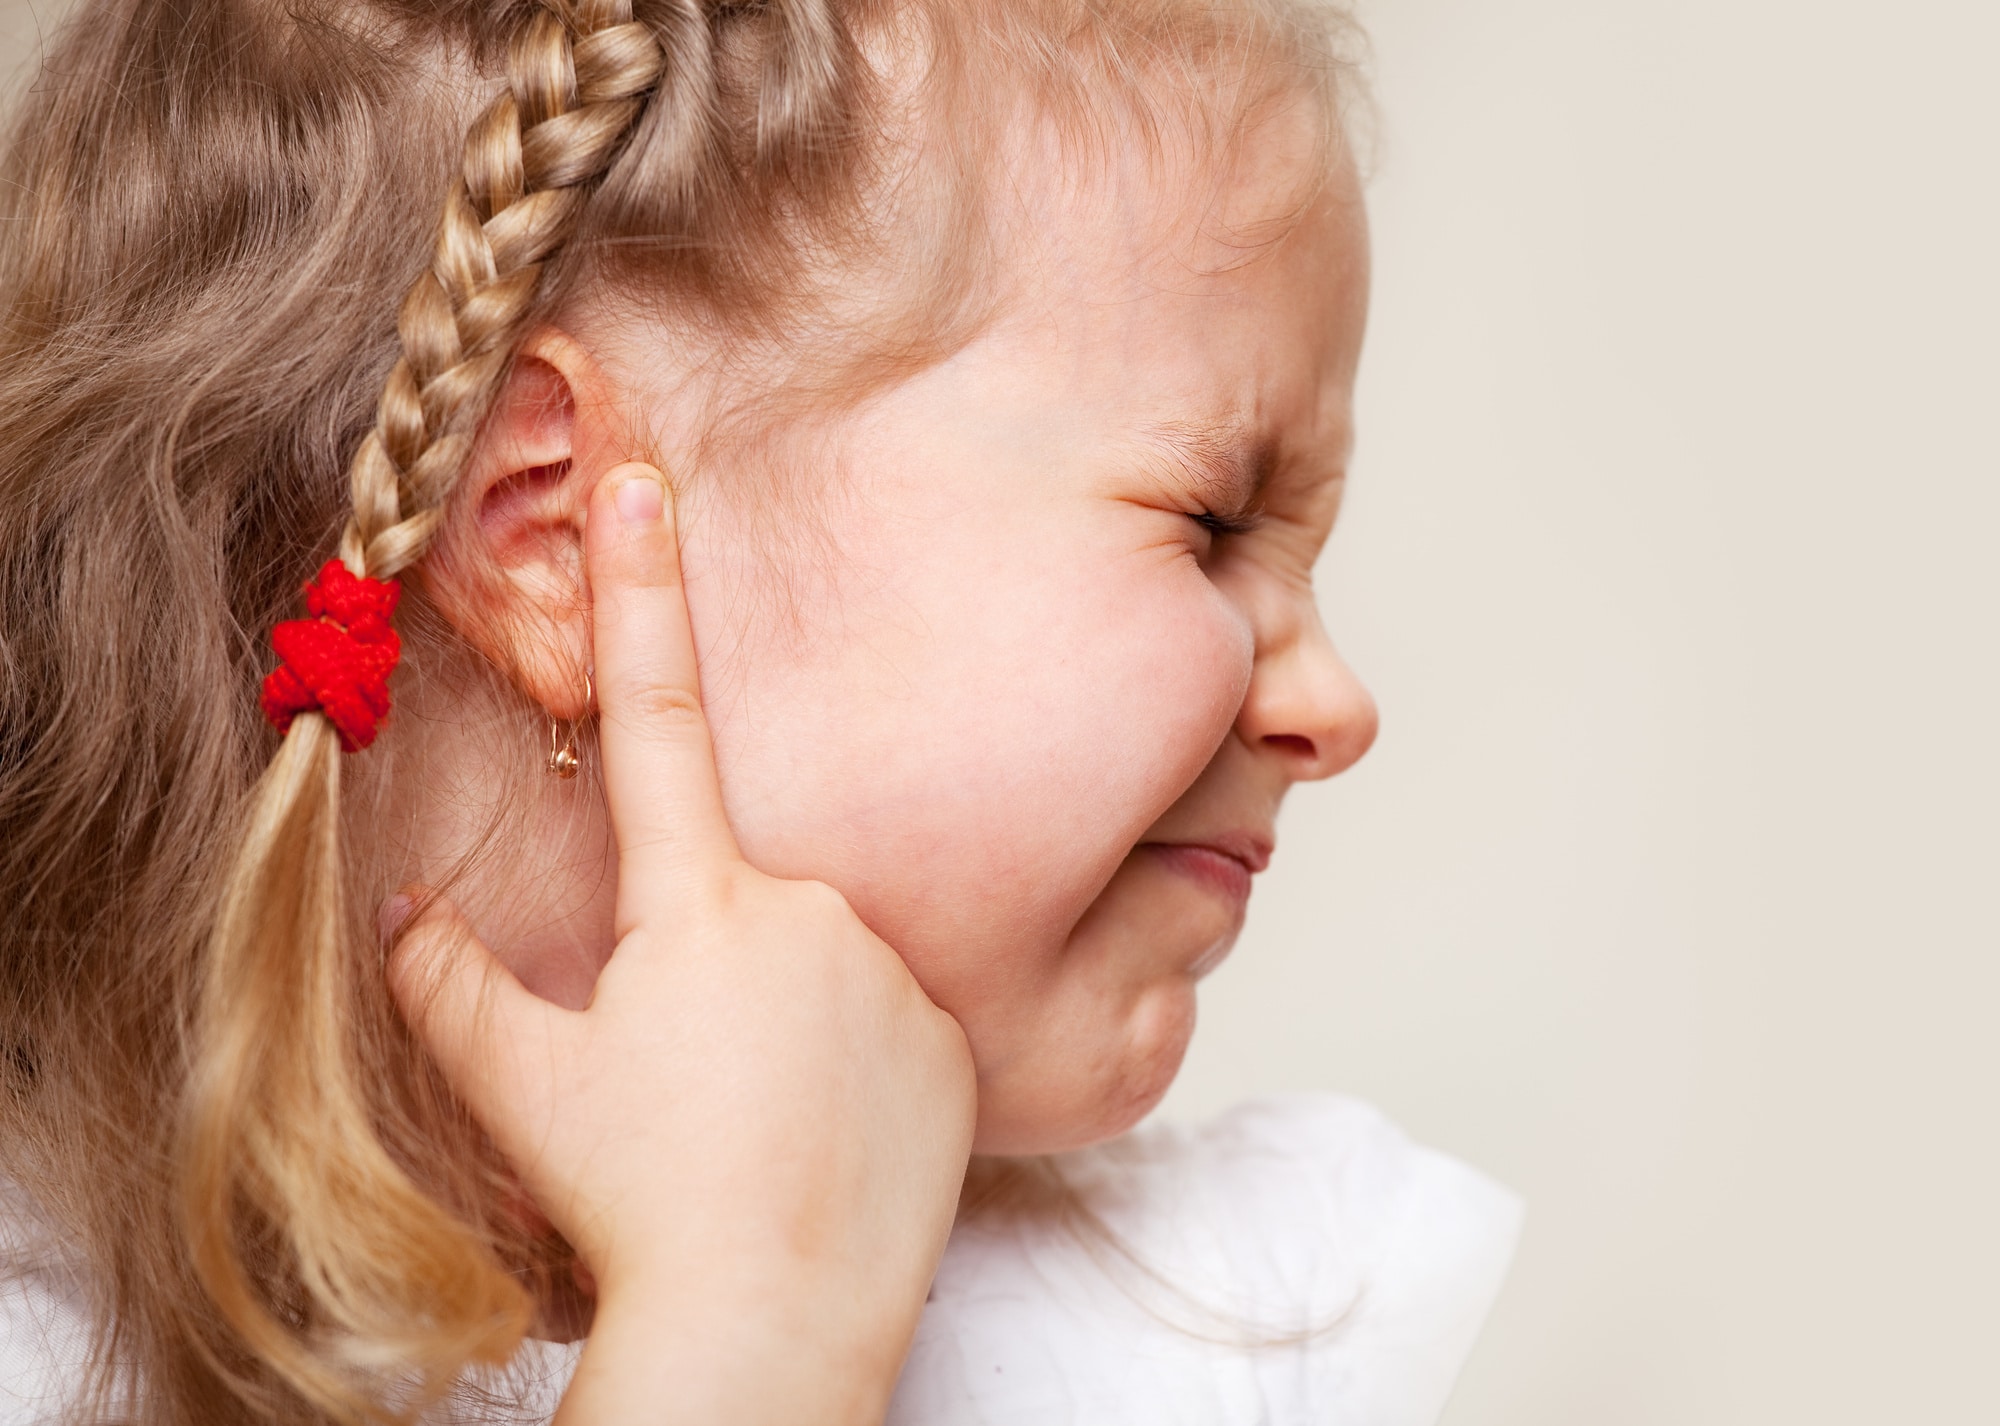 girl pointing to pain in ear